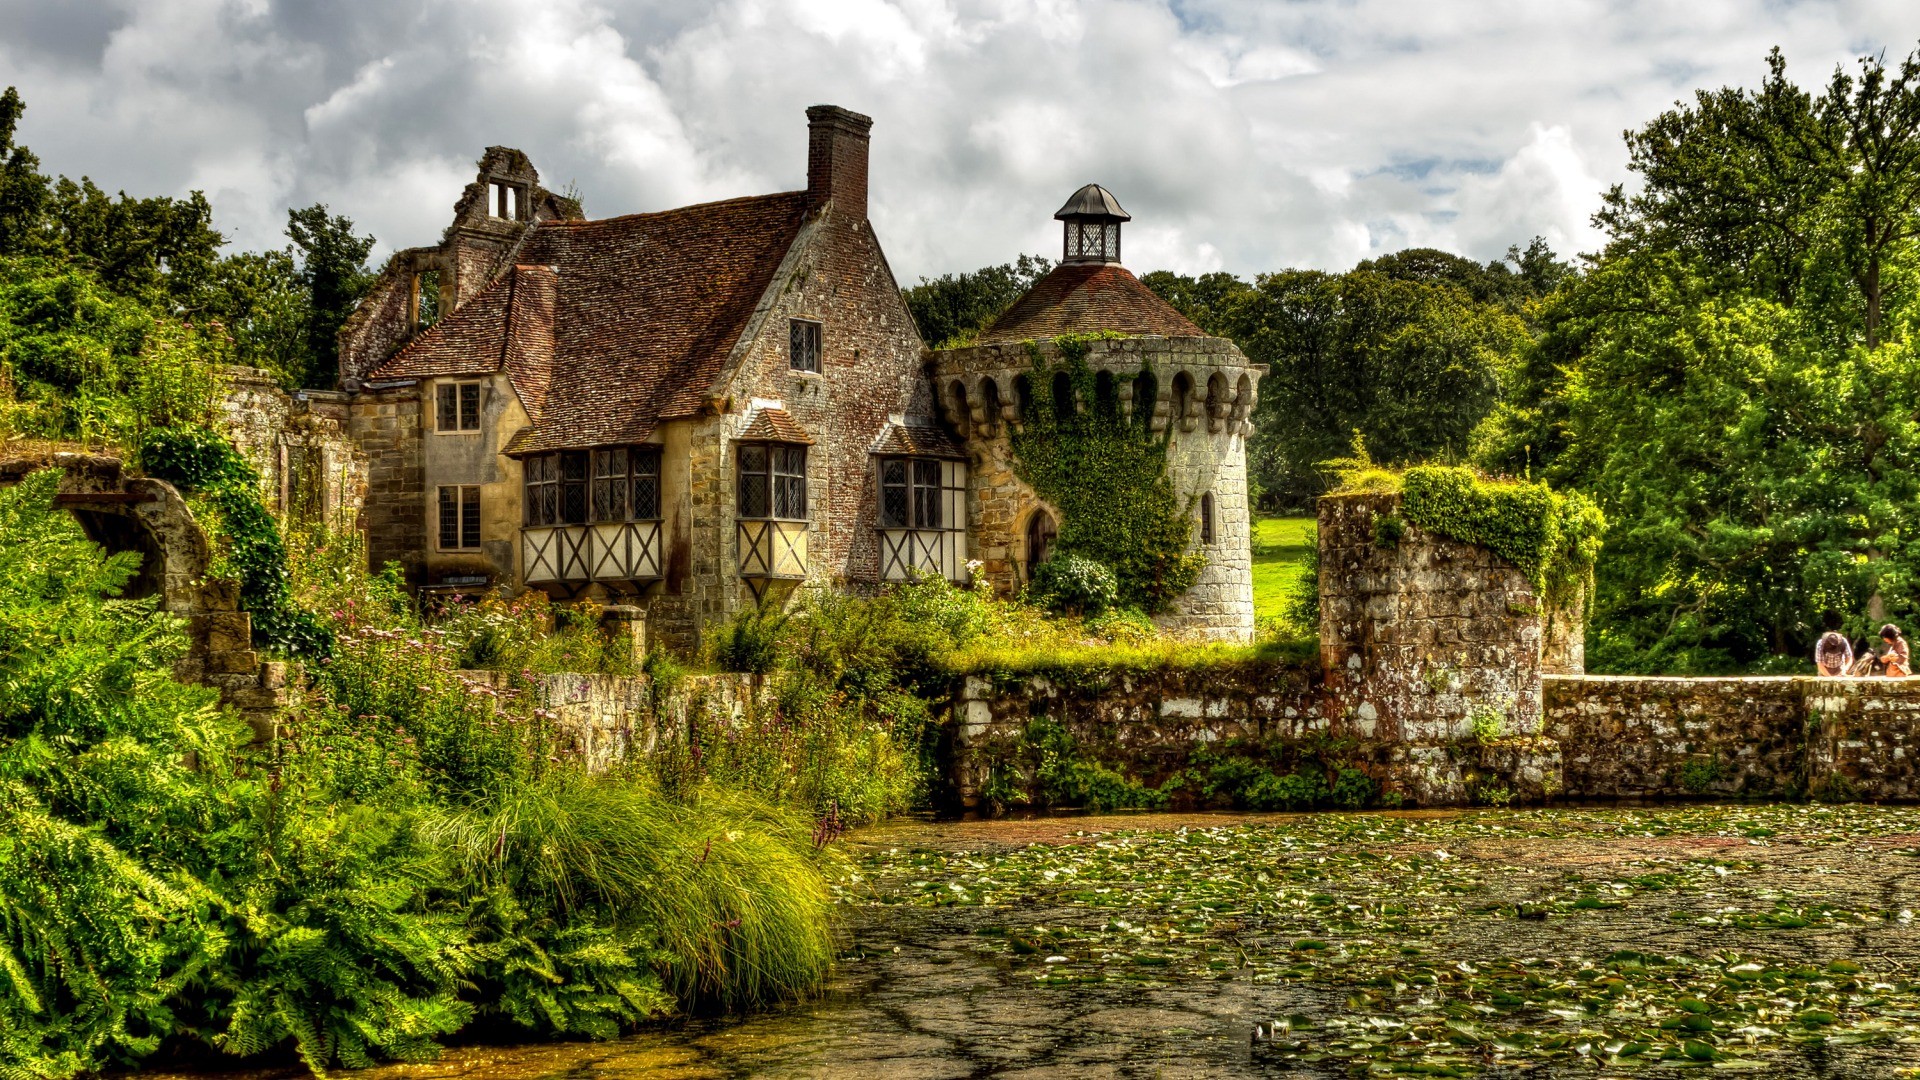 General 1920x1080 architecture old building trees nature bricks plants England UK HDR clouds forest lake couple